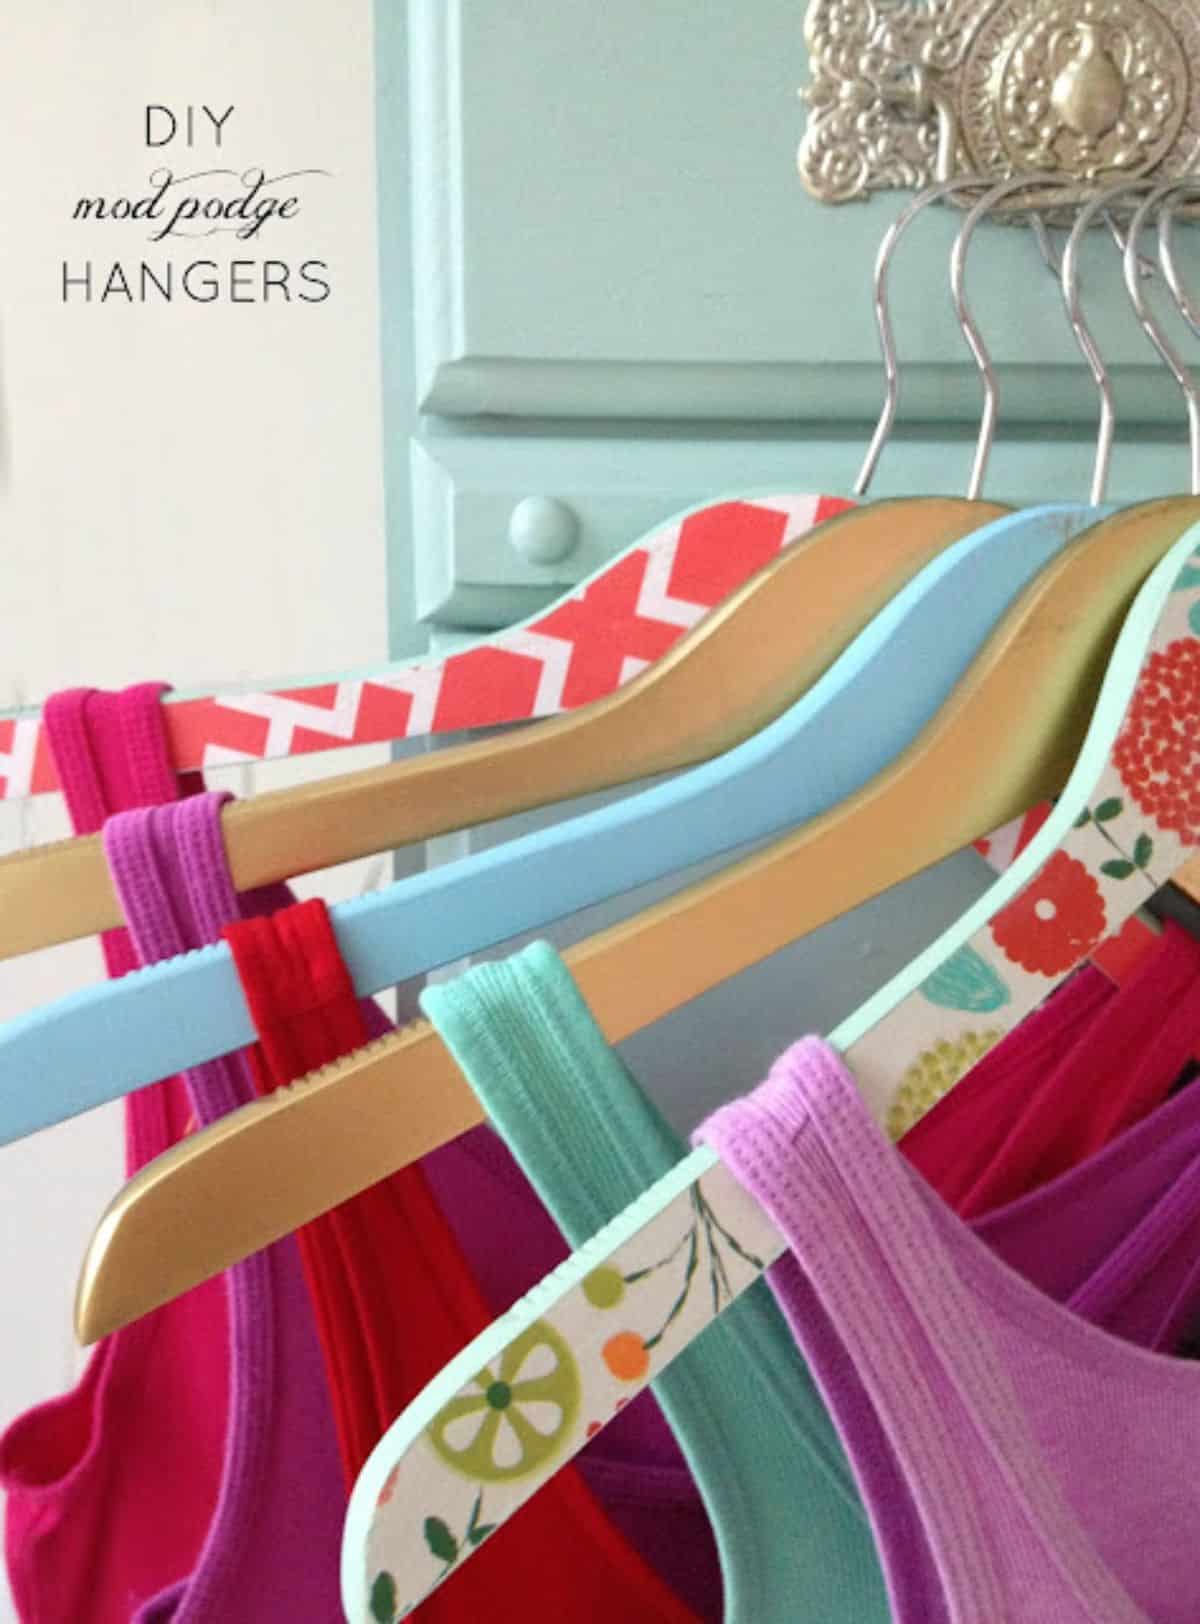 Colorful wooden coat hangers with shirts on.